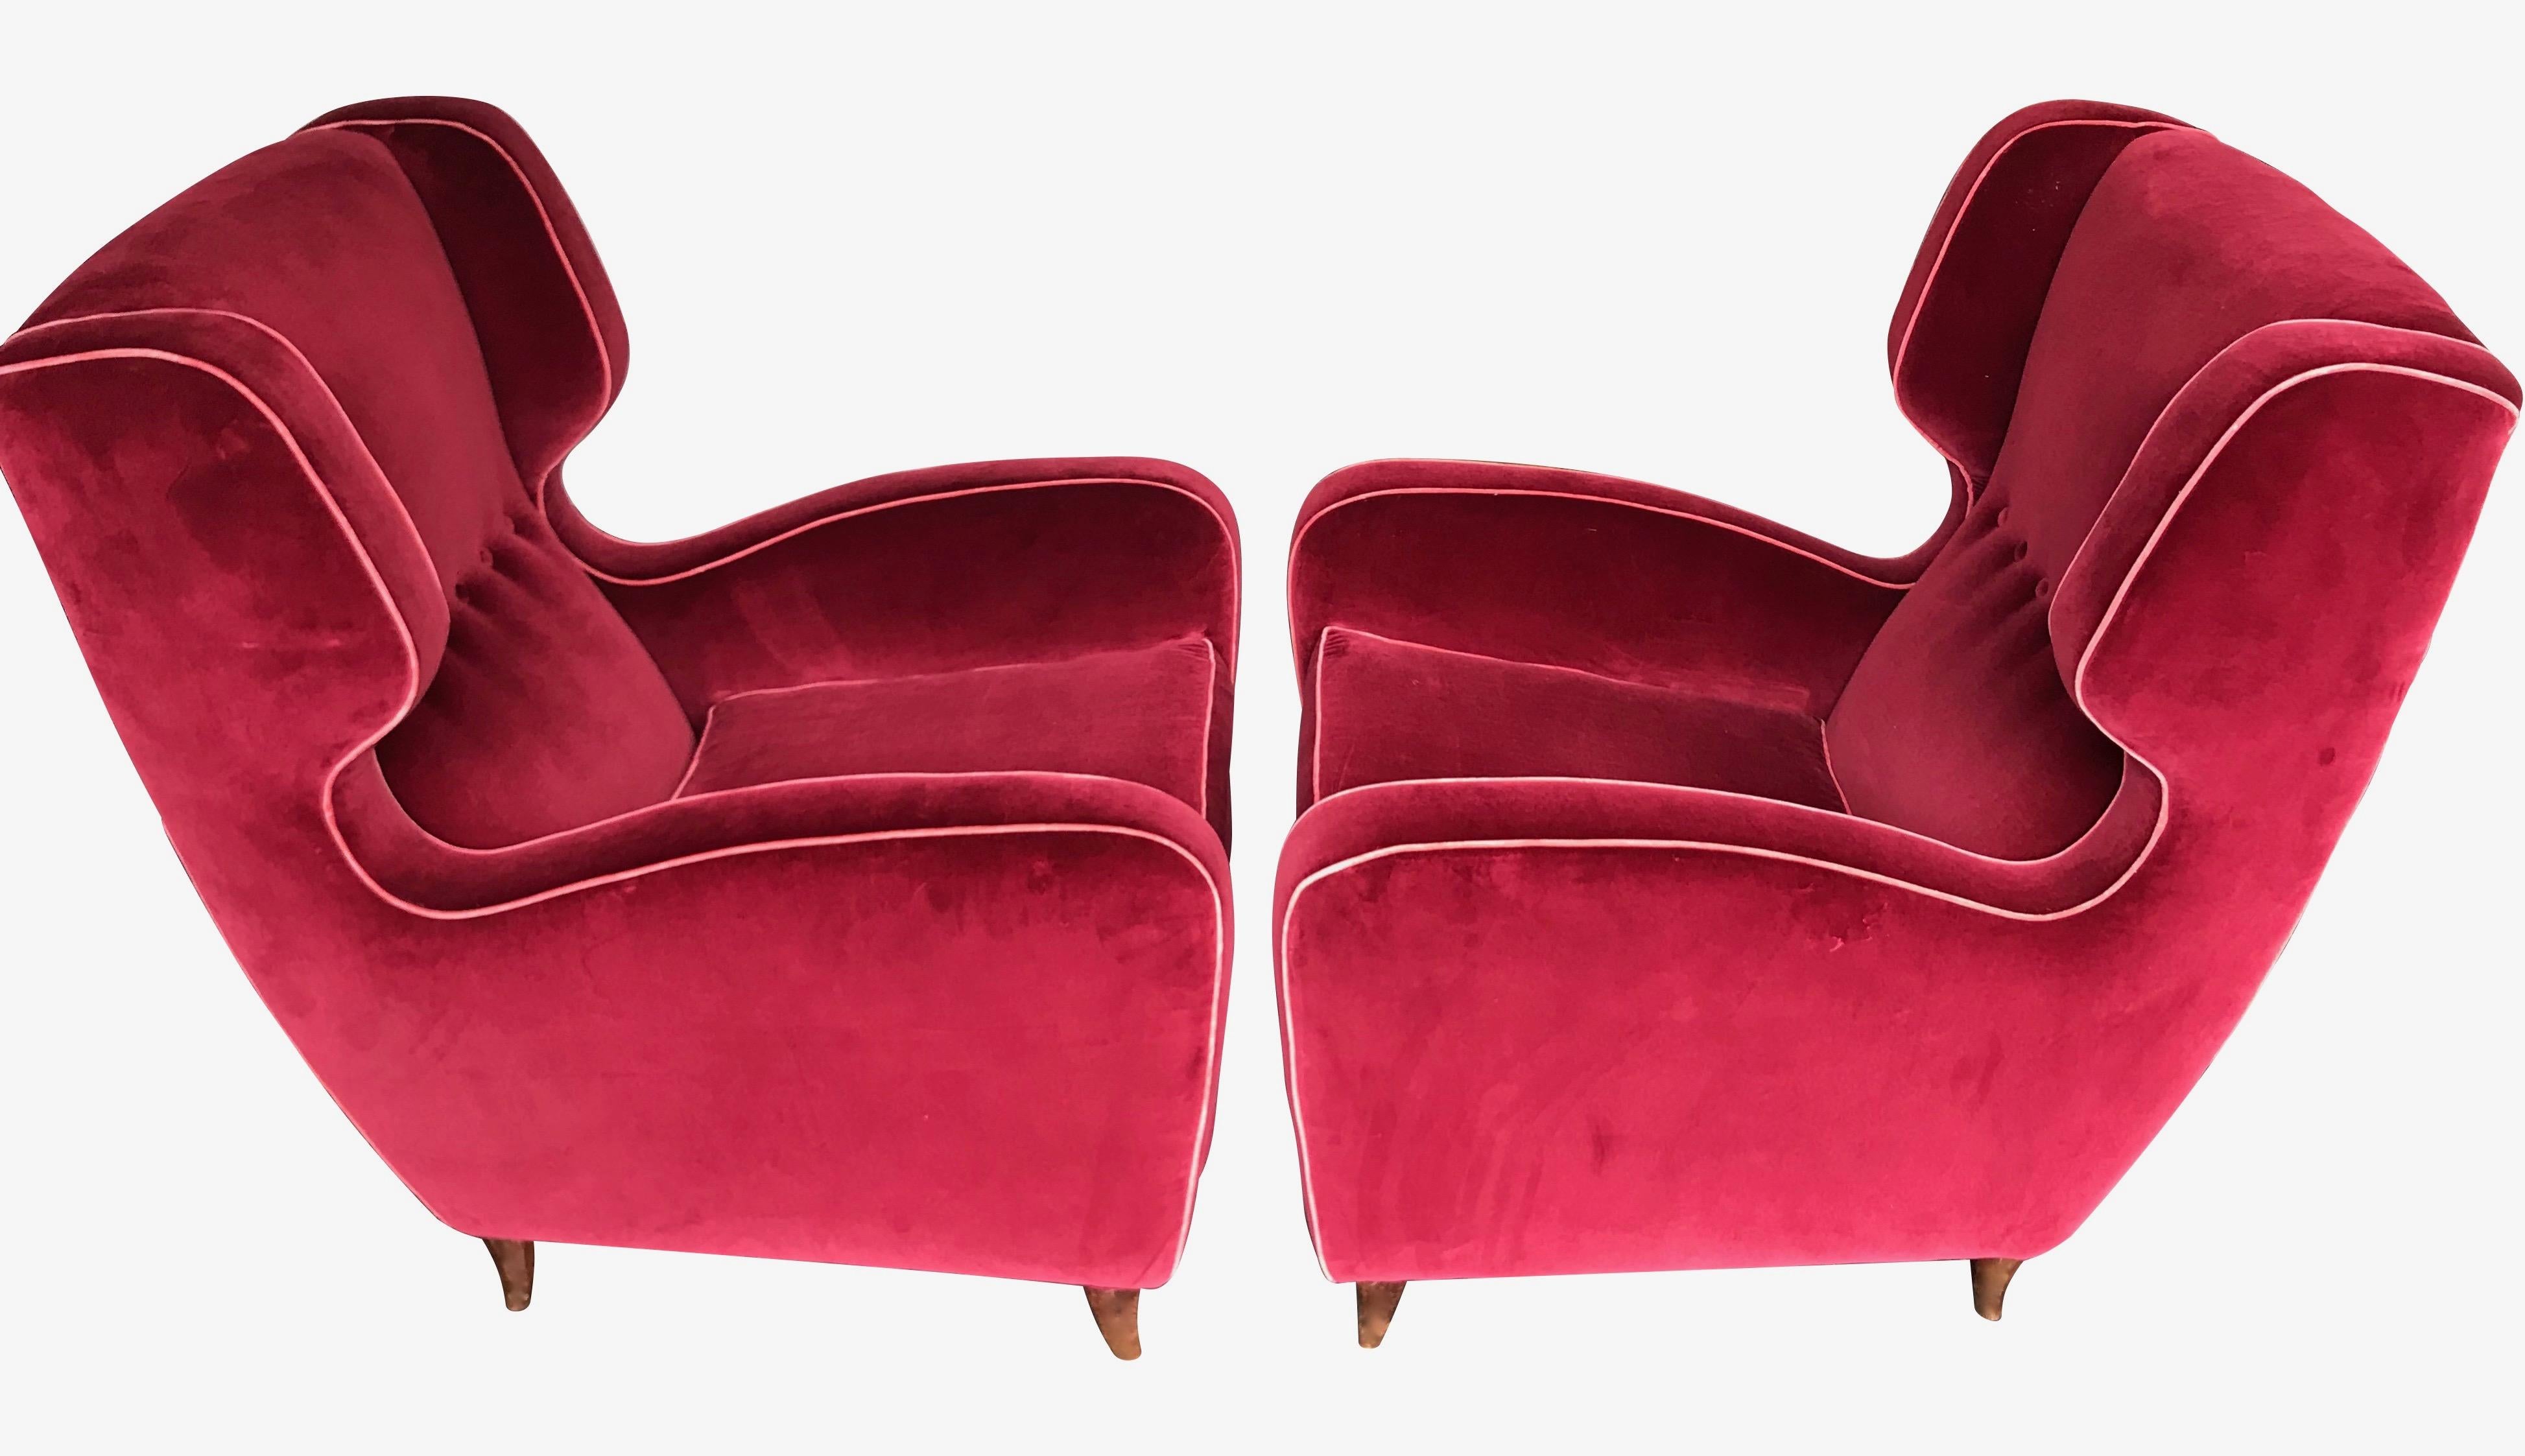 A beautiful pair of wing backed armchairs attributed to Guglielmo Ulrich with original rosewood shaped feet. Upholstered in red velvet with pink piping edging and buttoned back. Stunning design and very comfortable armchairs.